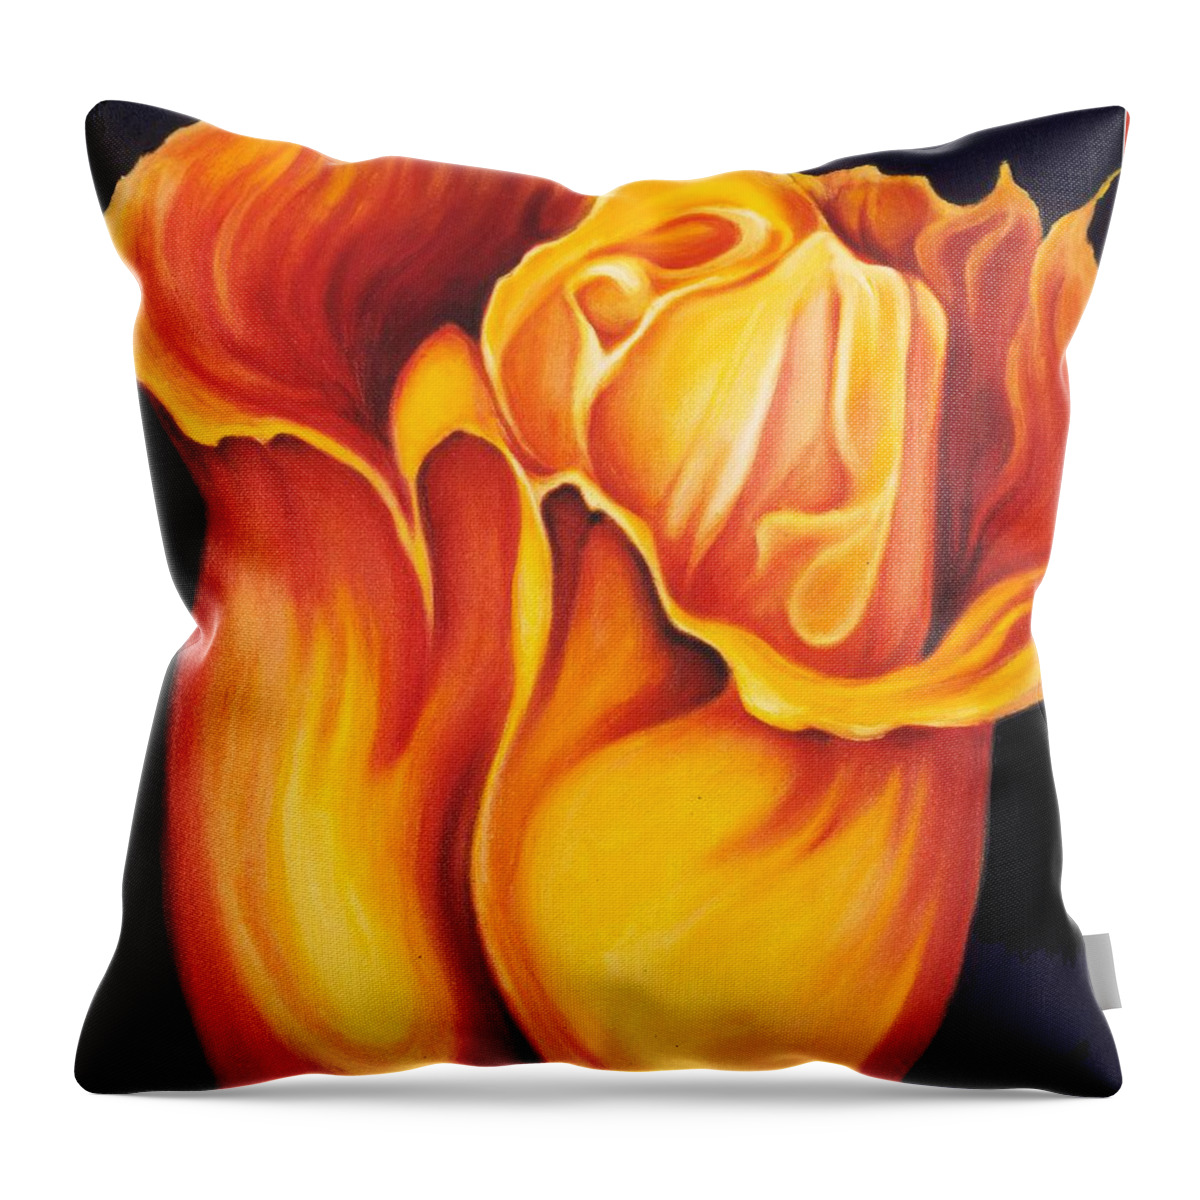 Surreal Tulip Throw Pillow featuring the painting Singing Tulip by Jordana Sands